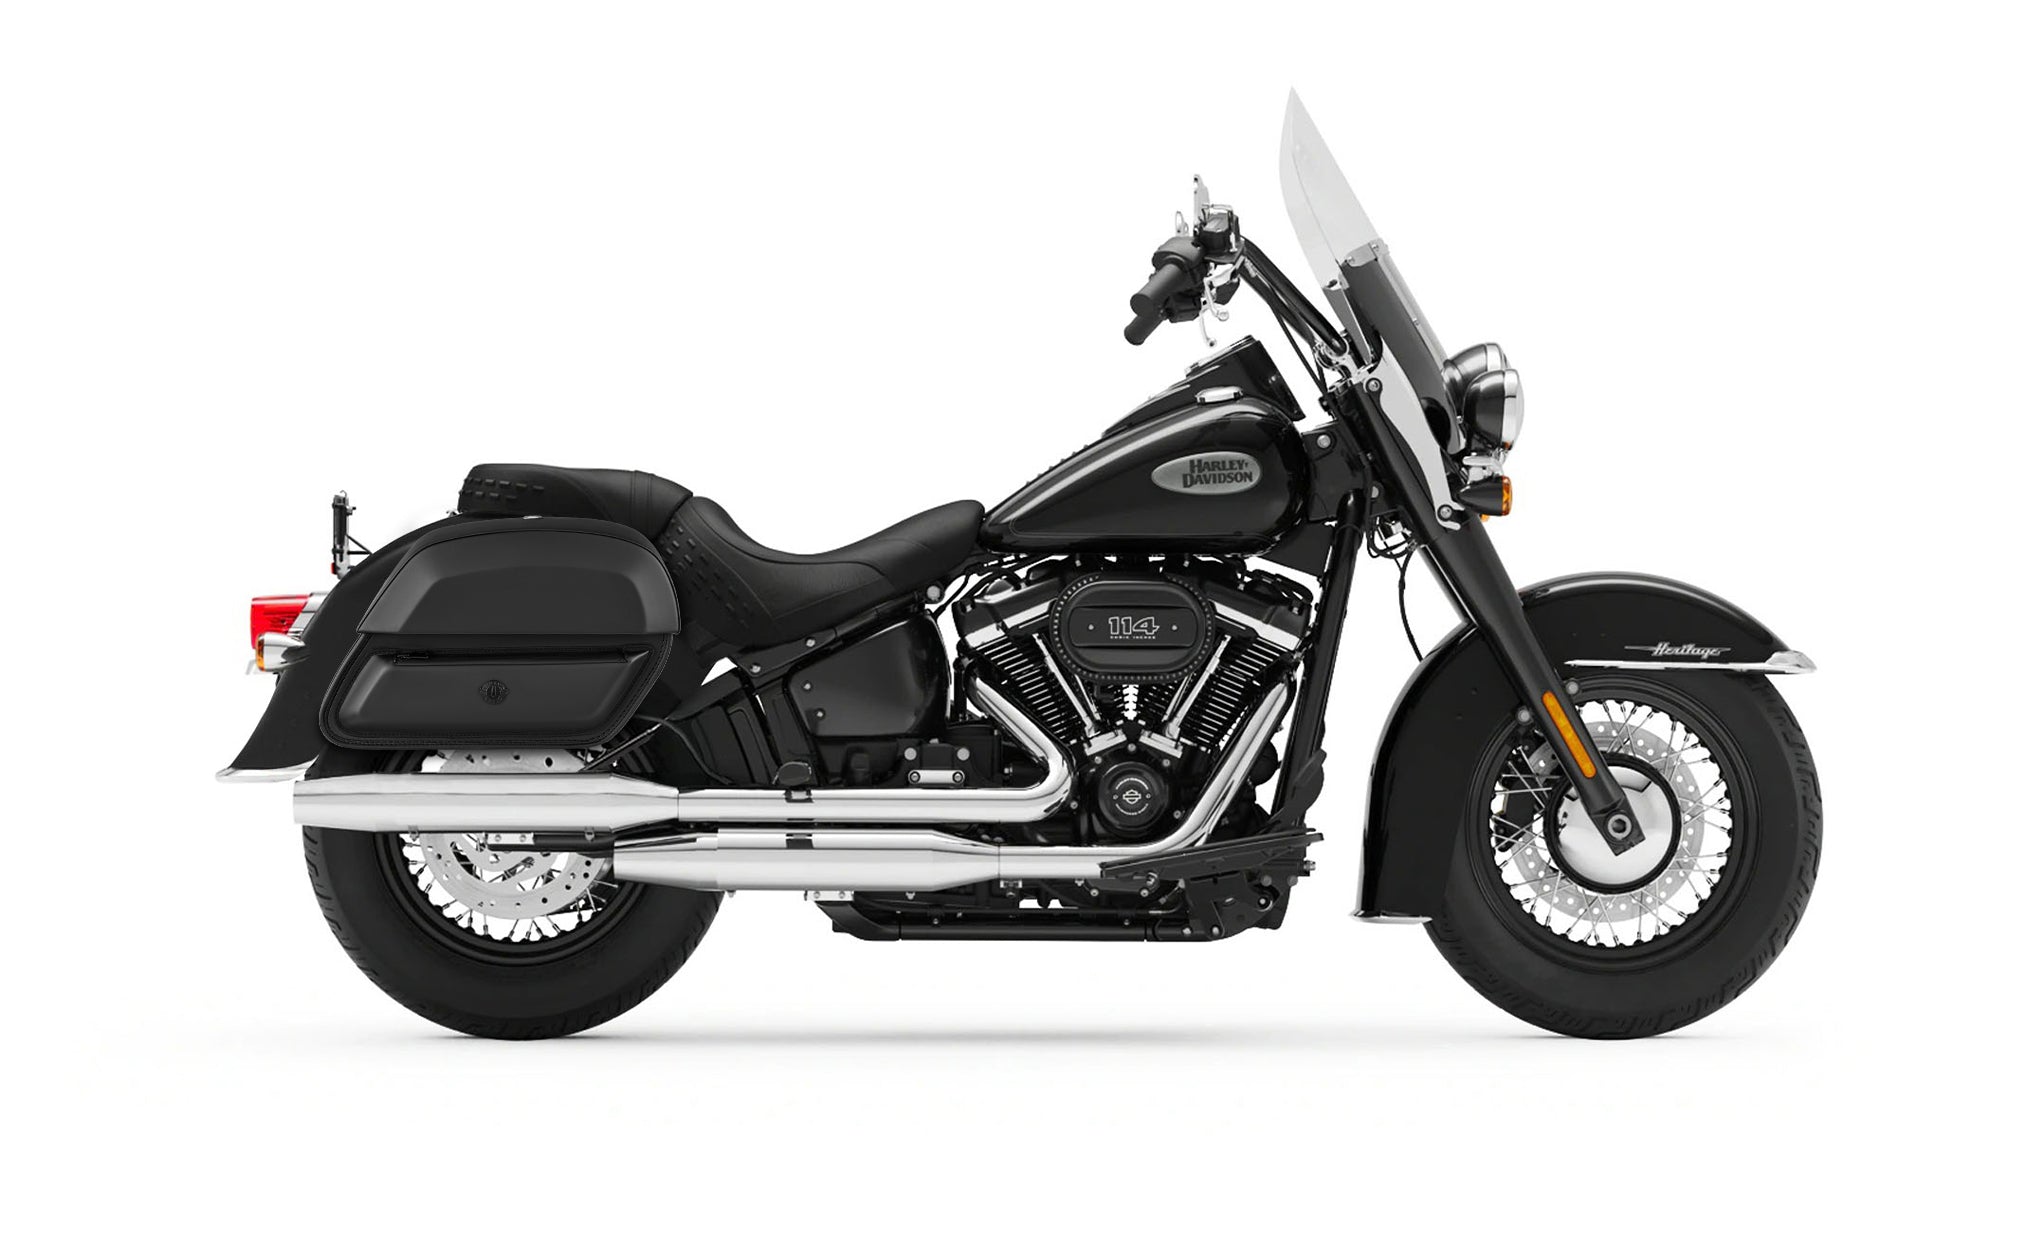 28L - Pantheon Medium Quick-Mount Motorcycle Saddlebags For Harley Softail Heritage FLHC/S @expand